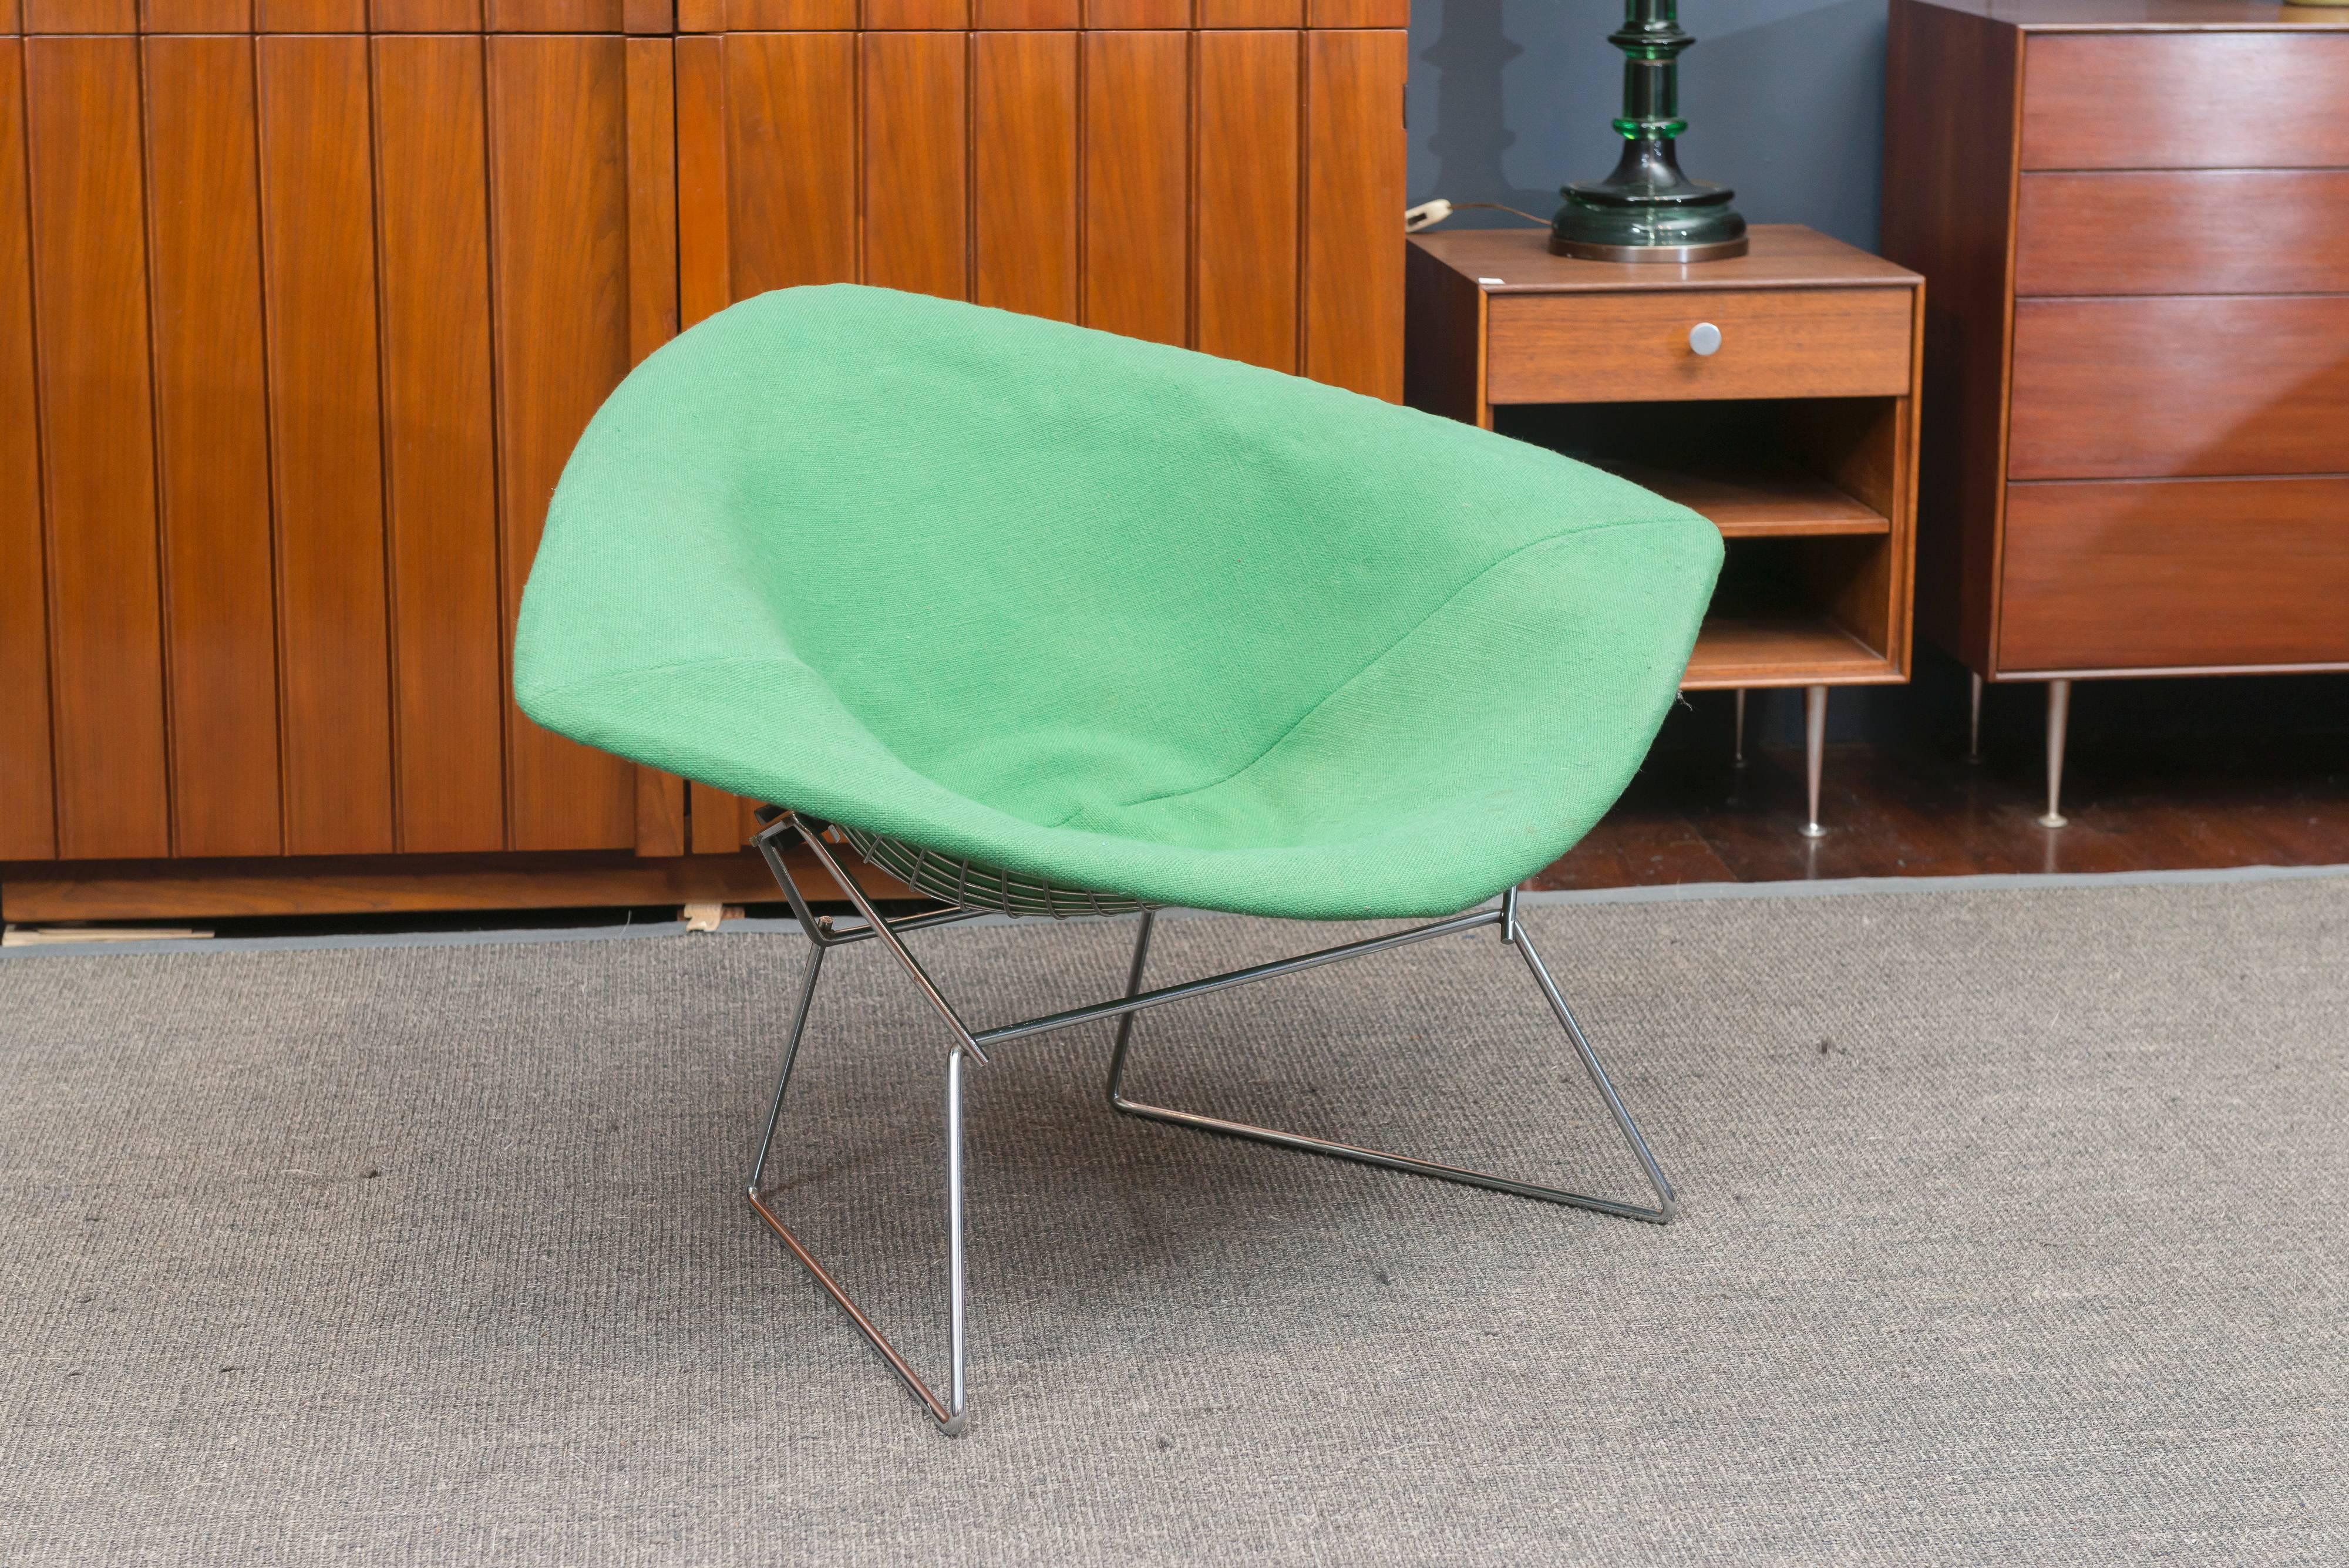 Large chrome diamond chair designed by Harry Bertoia for Knoll, U.S.A. Excellent condition chrome and rubber shocks, original hop sack pad has some light spotting.